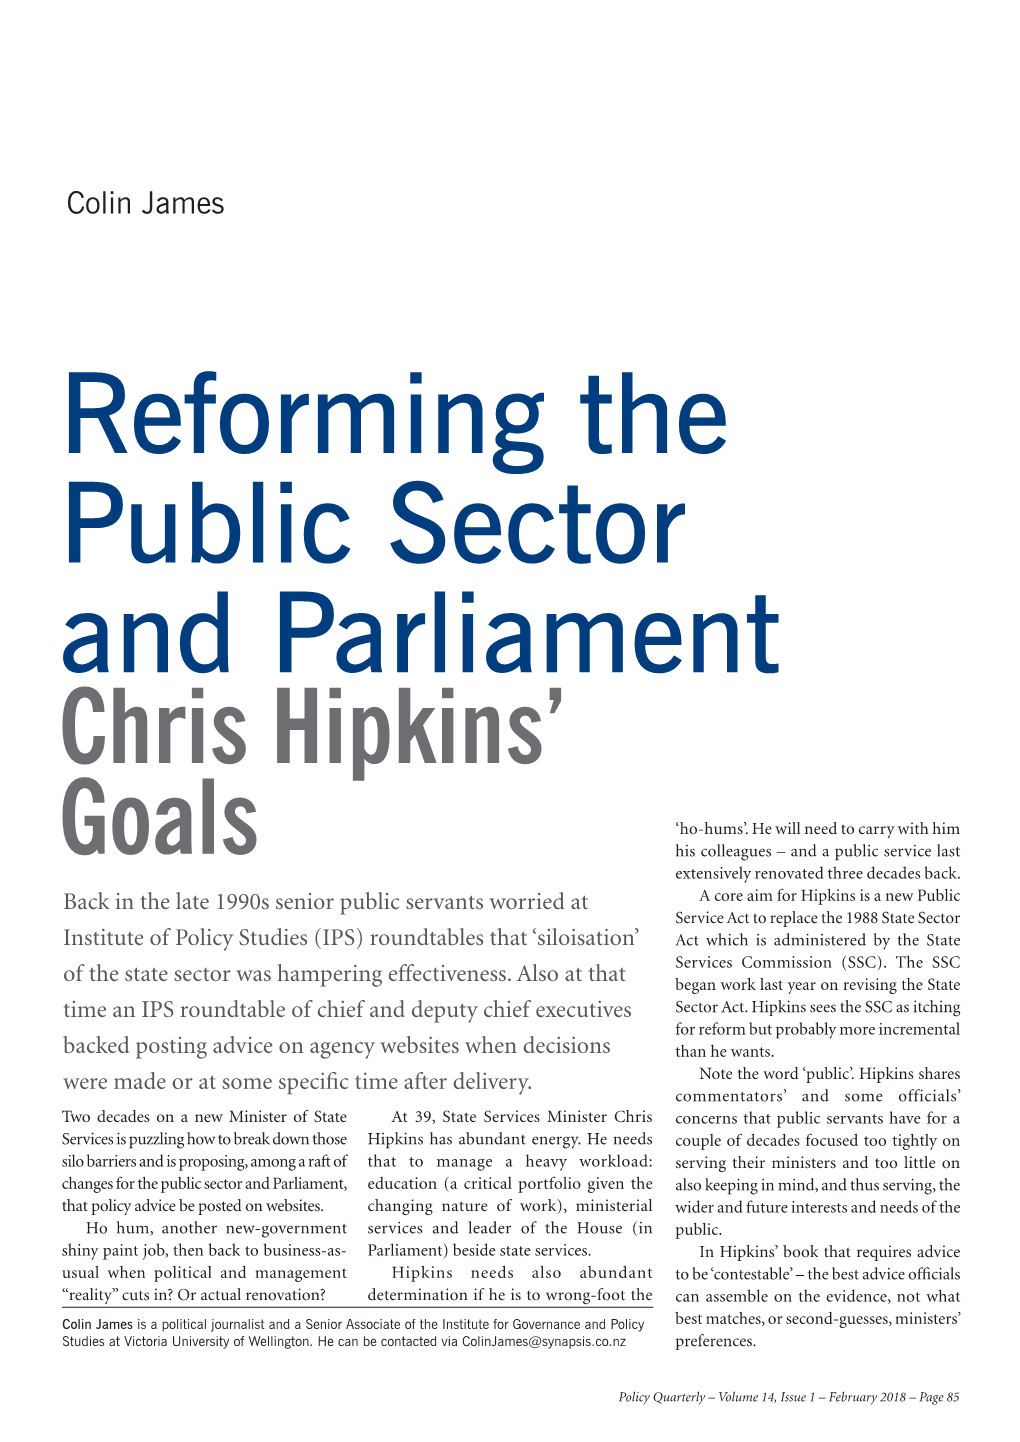 Reforming the Public Sector and Parliament Chris Hipkins’